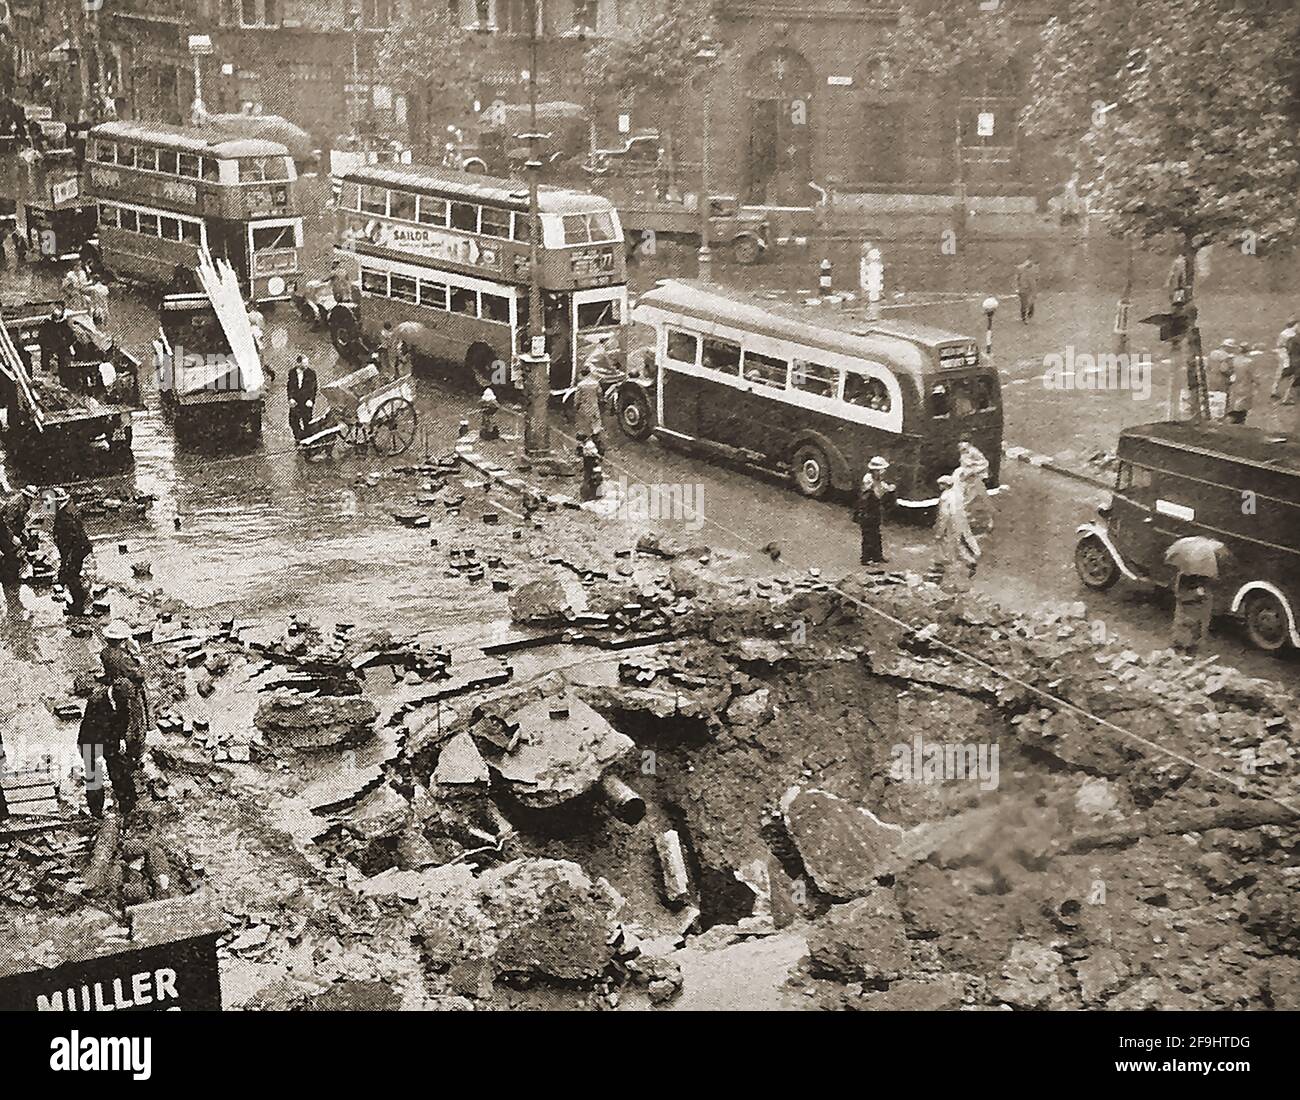 WWII - German Bombing raids on London, UK (Blitz)  in September 1940 - Vintage London buses drive past a bomb crater in the Strand. Stock Photo